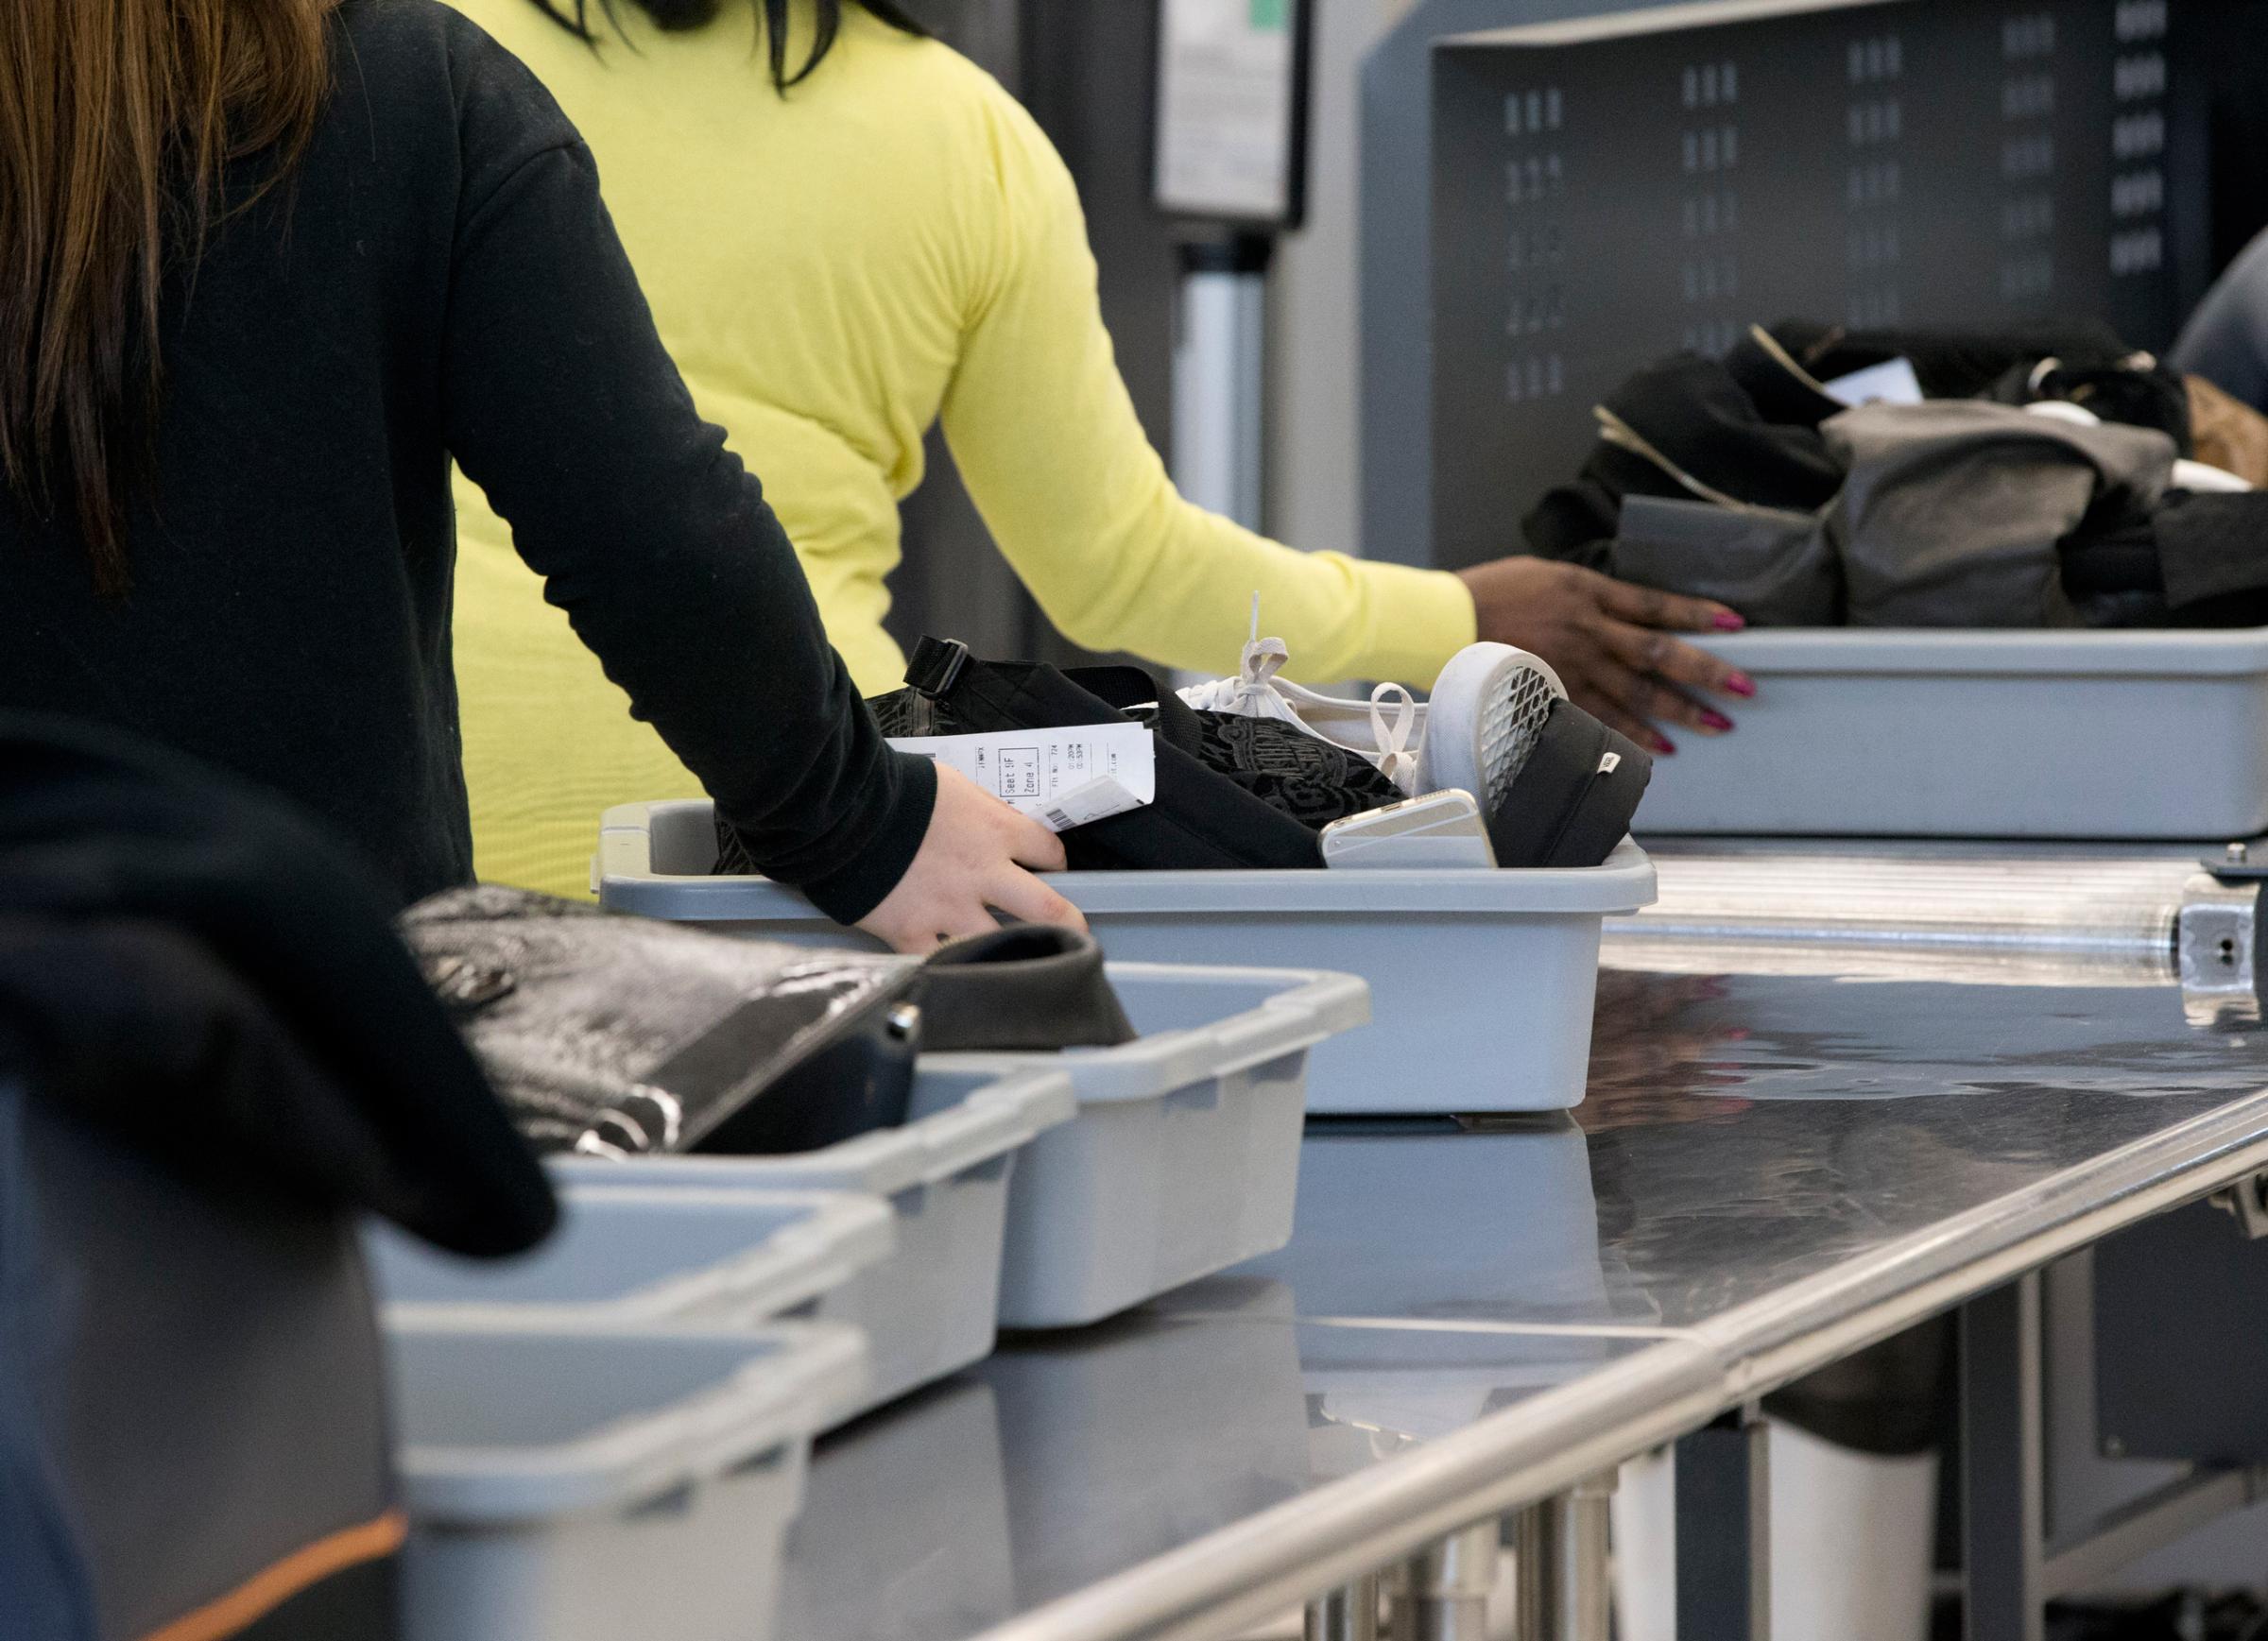 Passengers load their items into bins to be scanned as they pass through security at the Fort Lauderdale-Hollywood International Airport, Friday, Dec. 18, 2015, in Fort Lauderdale, Fla. Transportation Security Administration spokesperson Sari Koshetz said that about 8,000 lbs. of prohibited items were confiscated this year by the TSA at the Fort Lauderdale airport. (AP Photo/Wilfredo Lee)